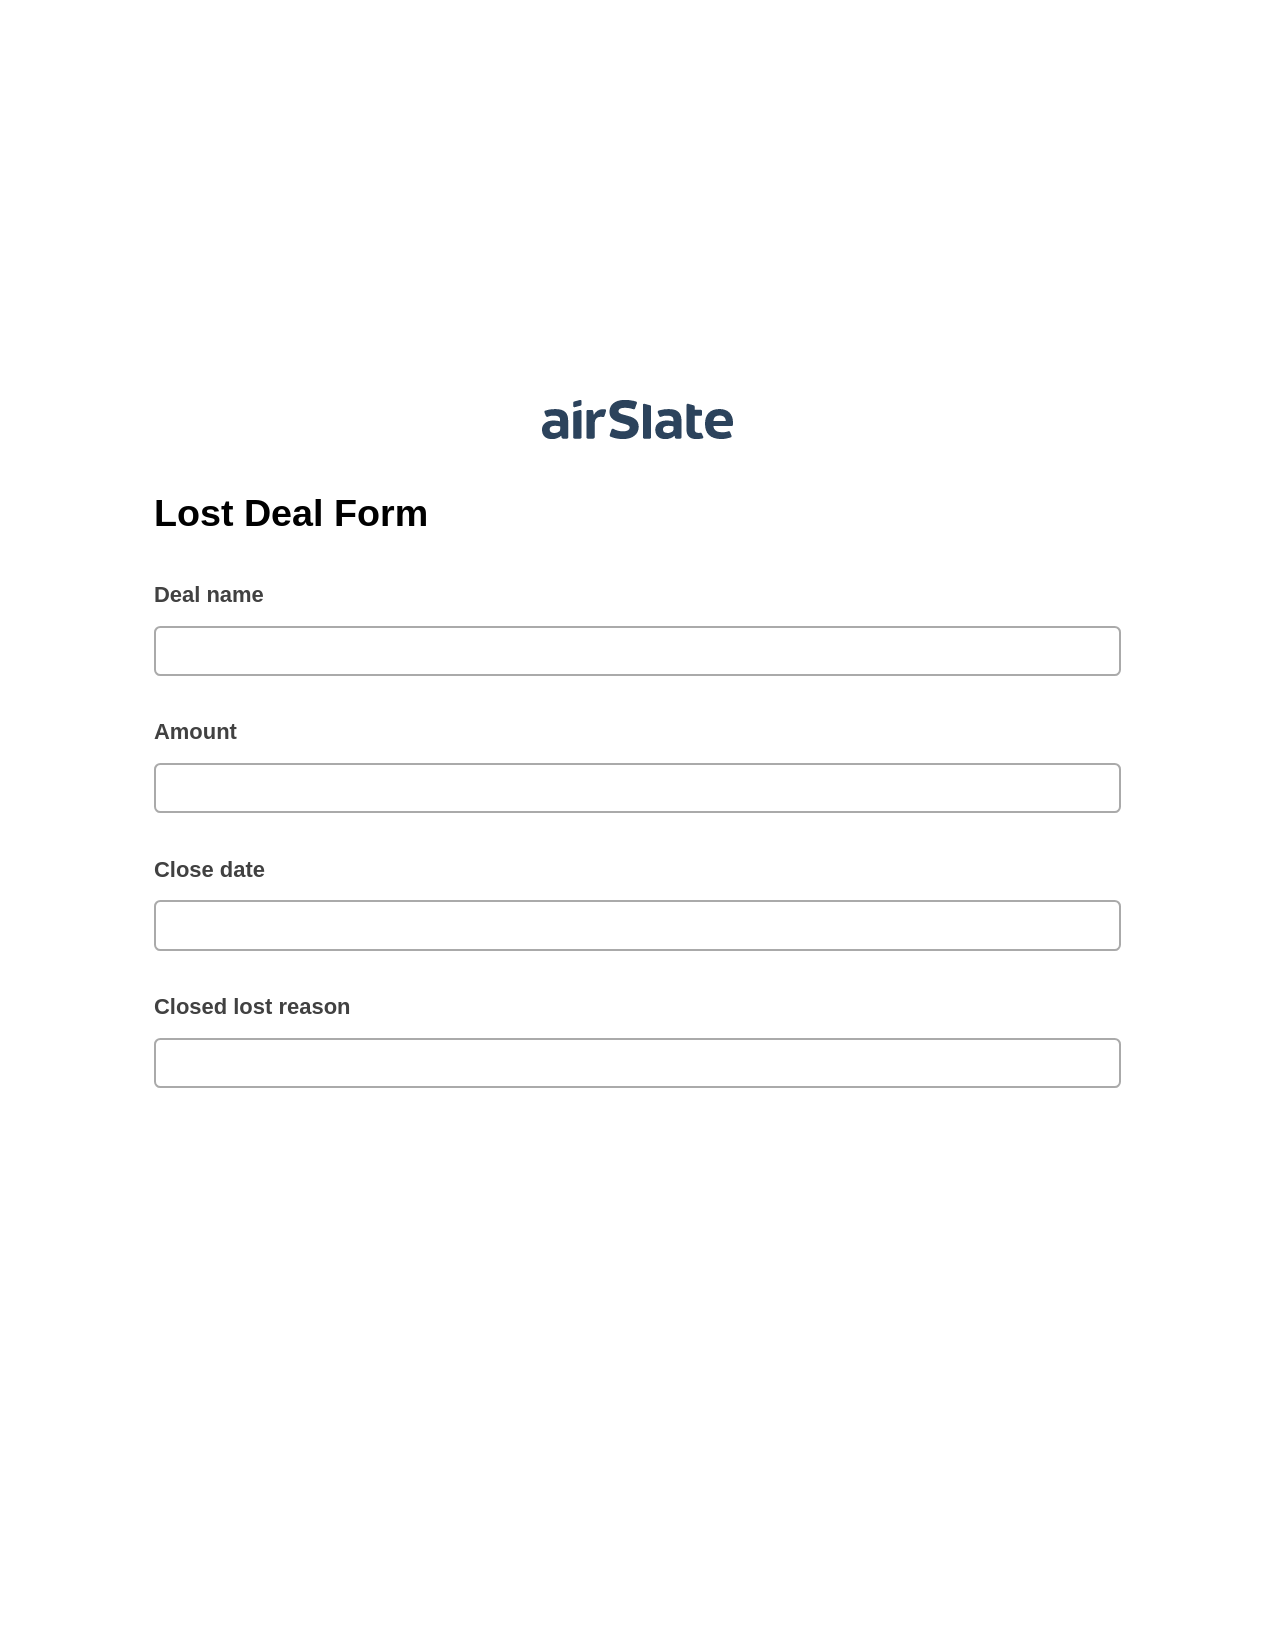 Lost Deal Form Pre-fill from another Slate Bot, Remove Slate Bot, Export to MySQL Bot